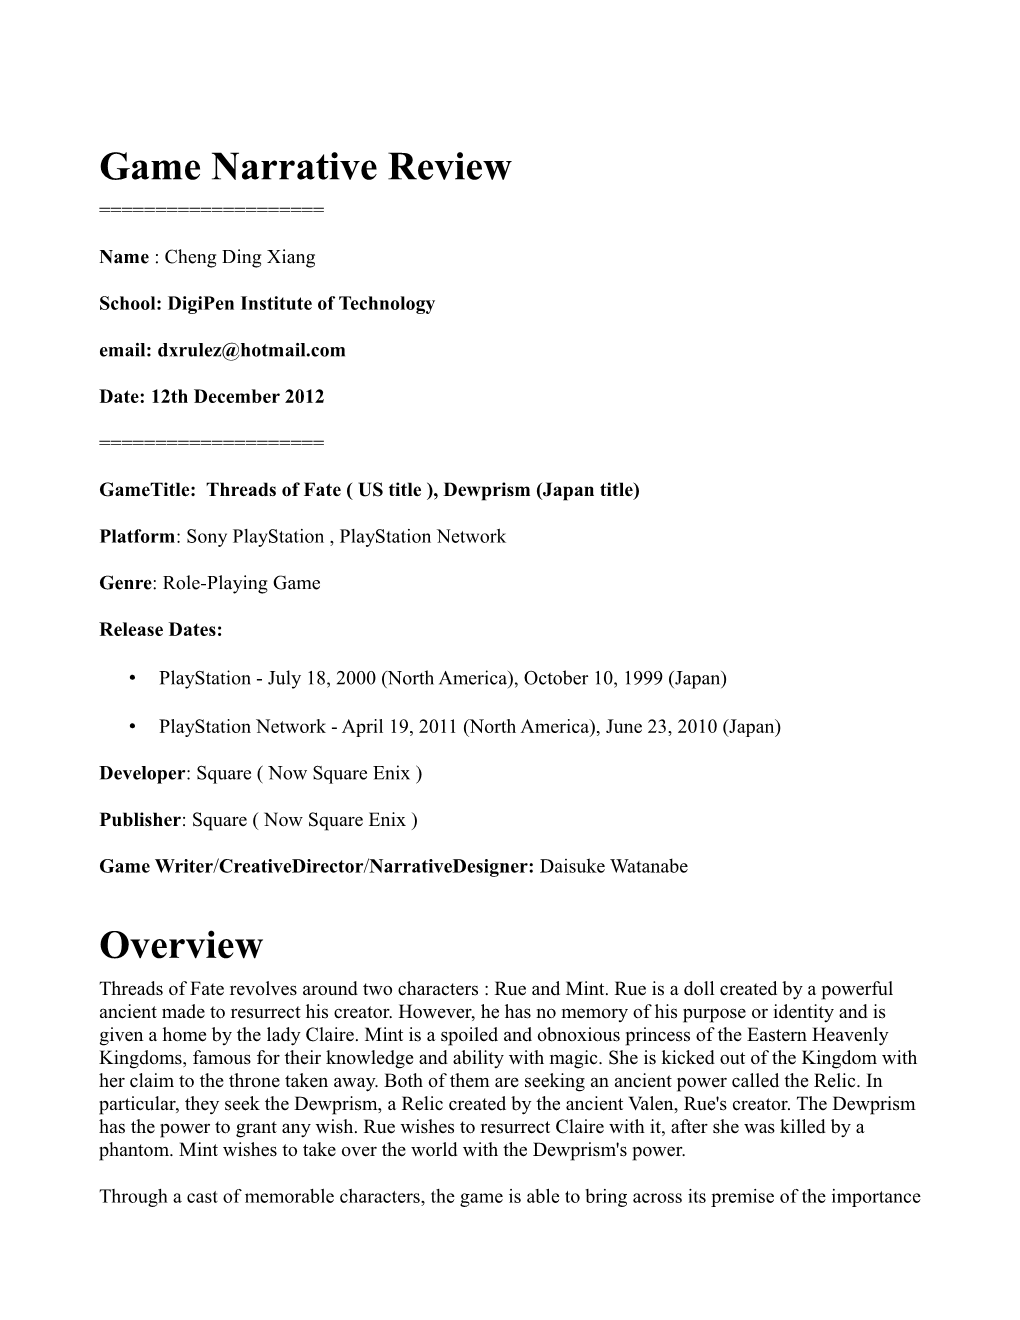 Game Narrative Review Overview